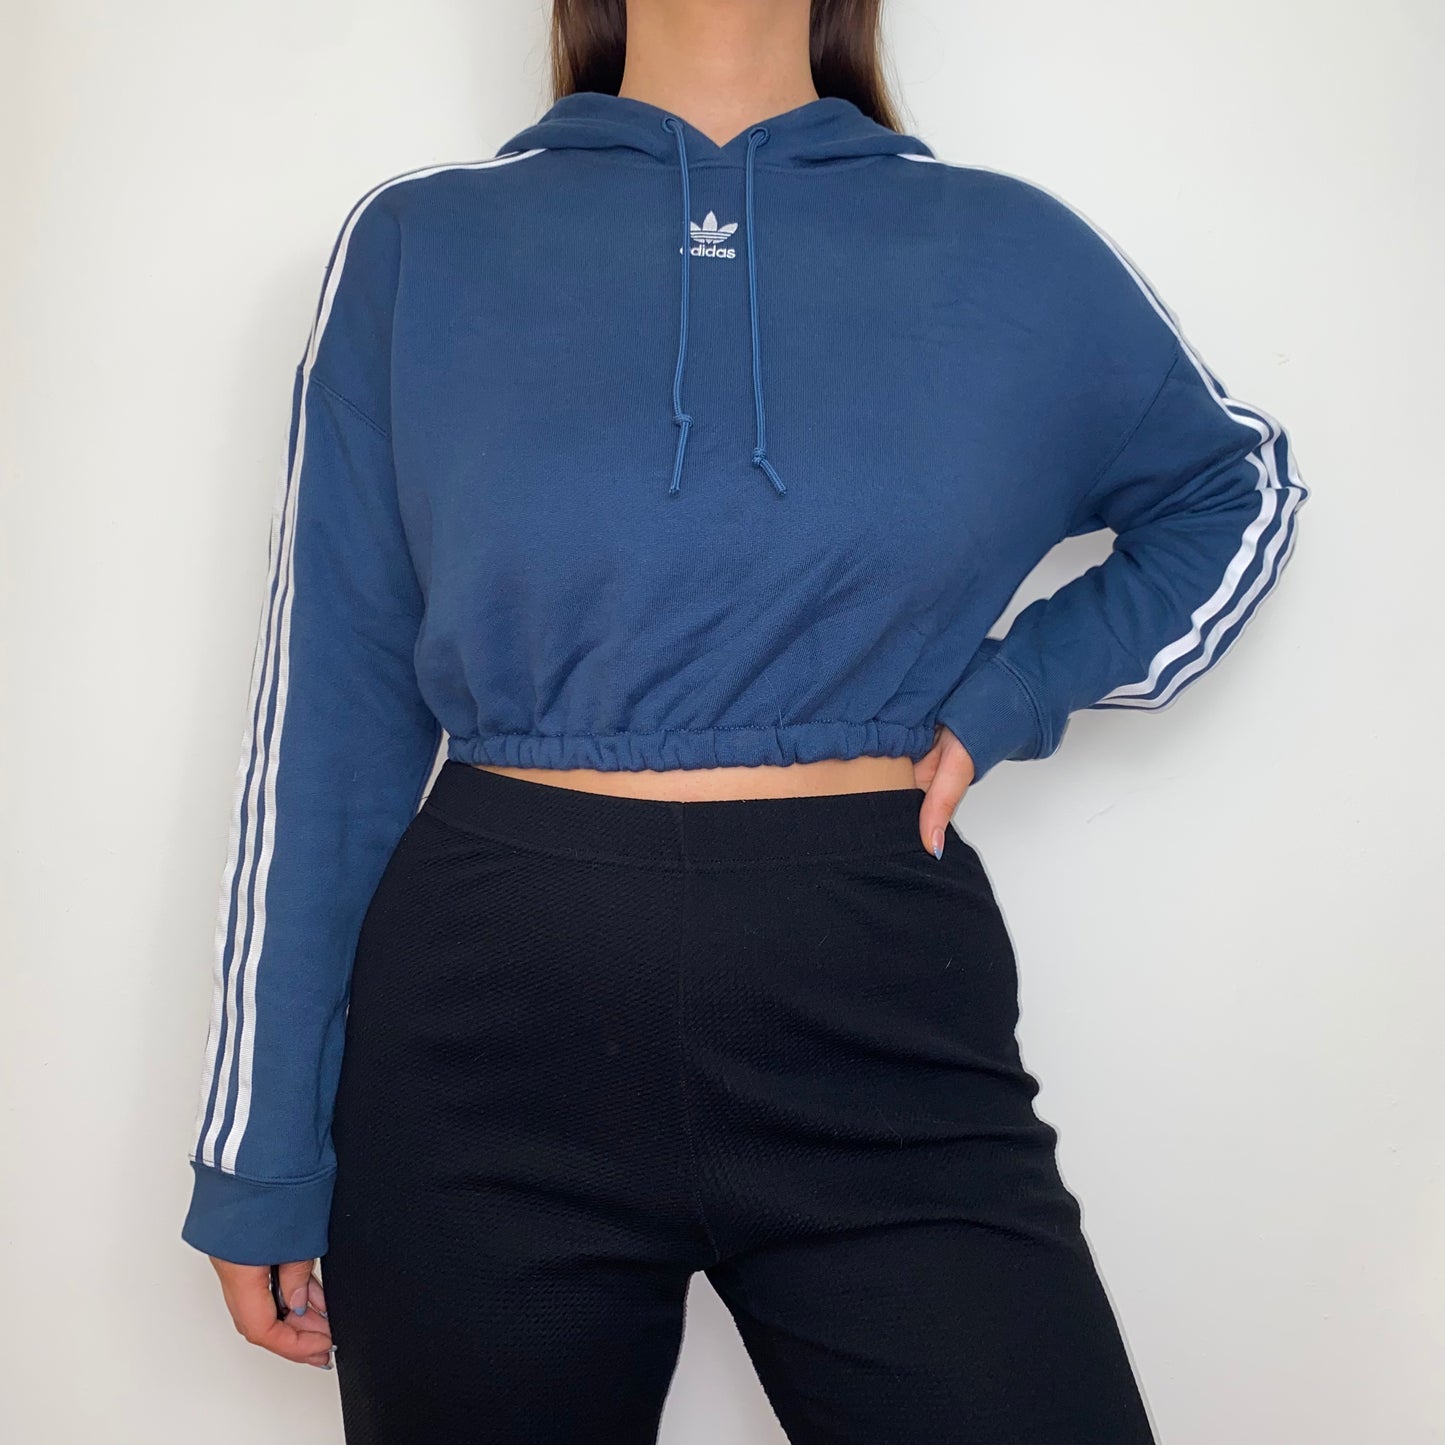 navy cropped hoodie with whtie adidas logo shown on a model wearing black trousers with hand on hip